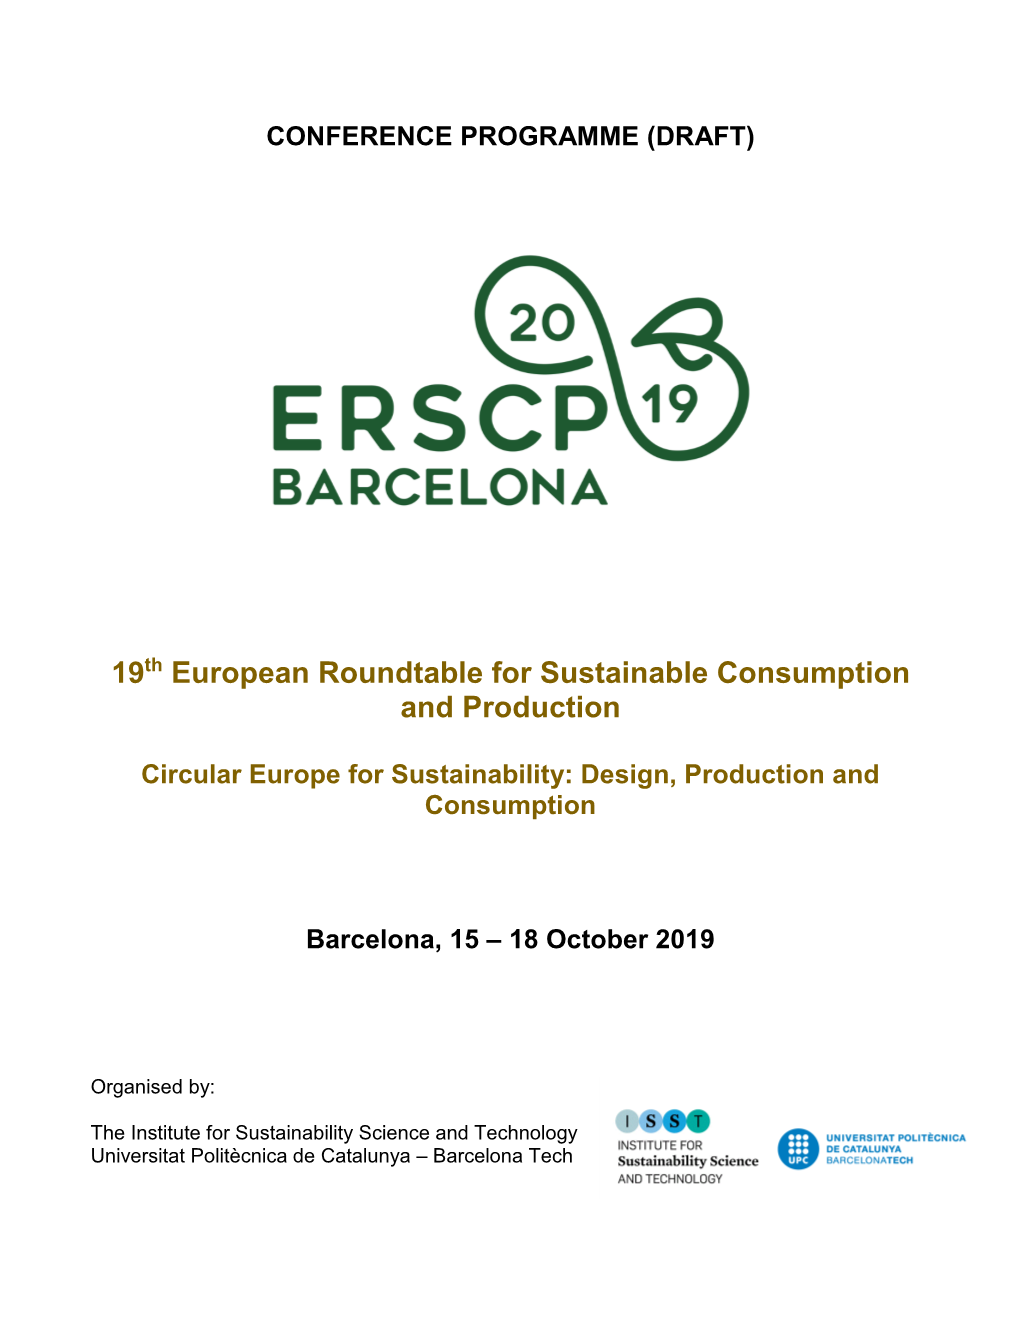 19Th European Roundtable for Sustainable Consumption and Production